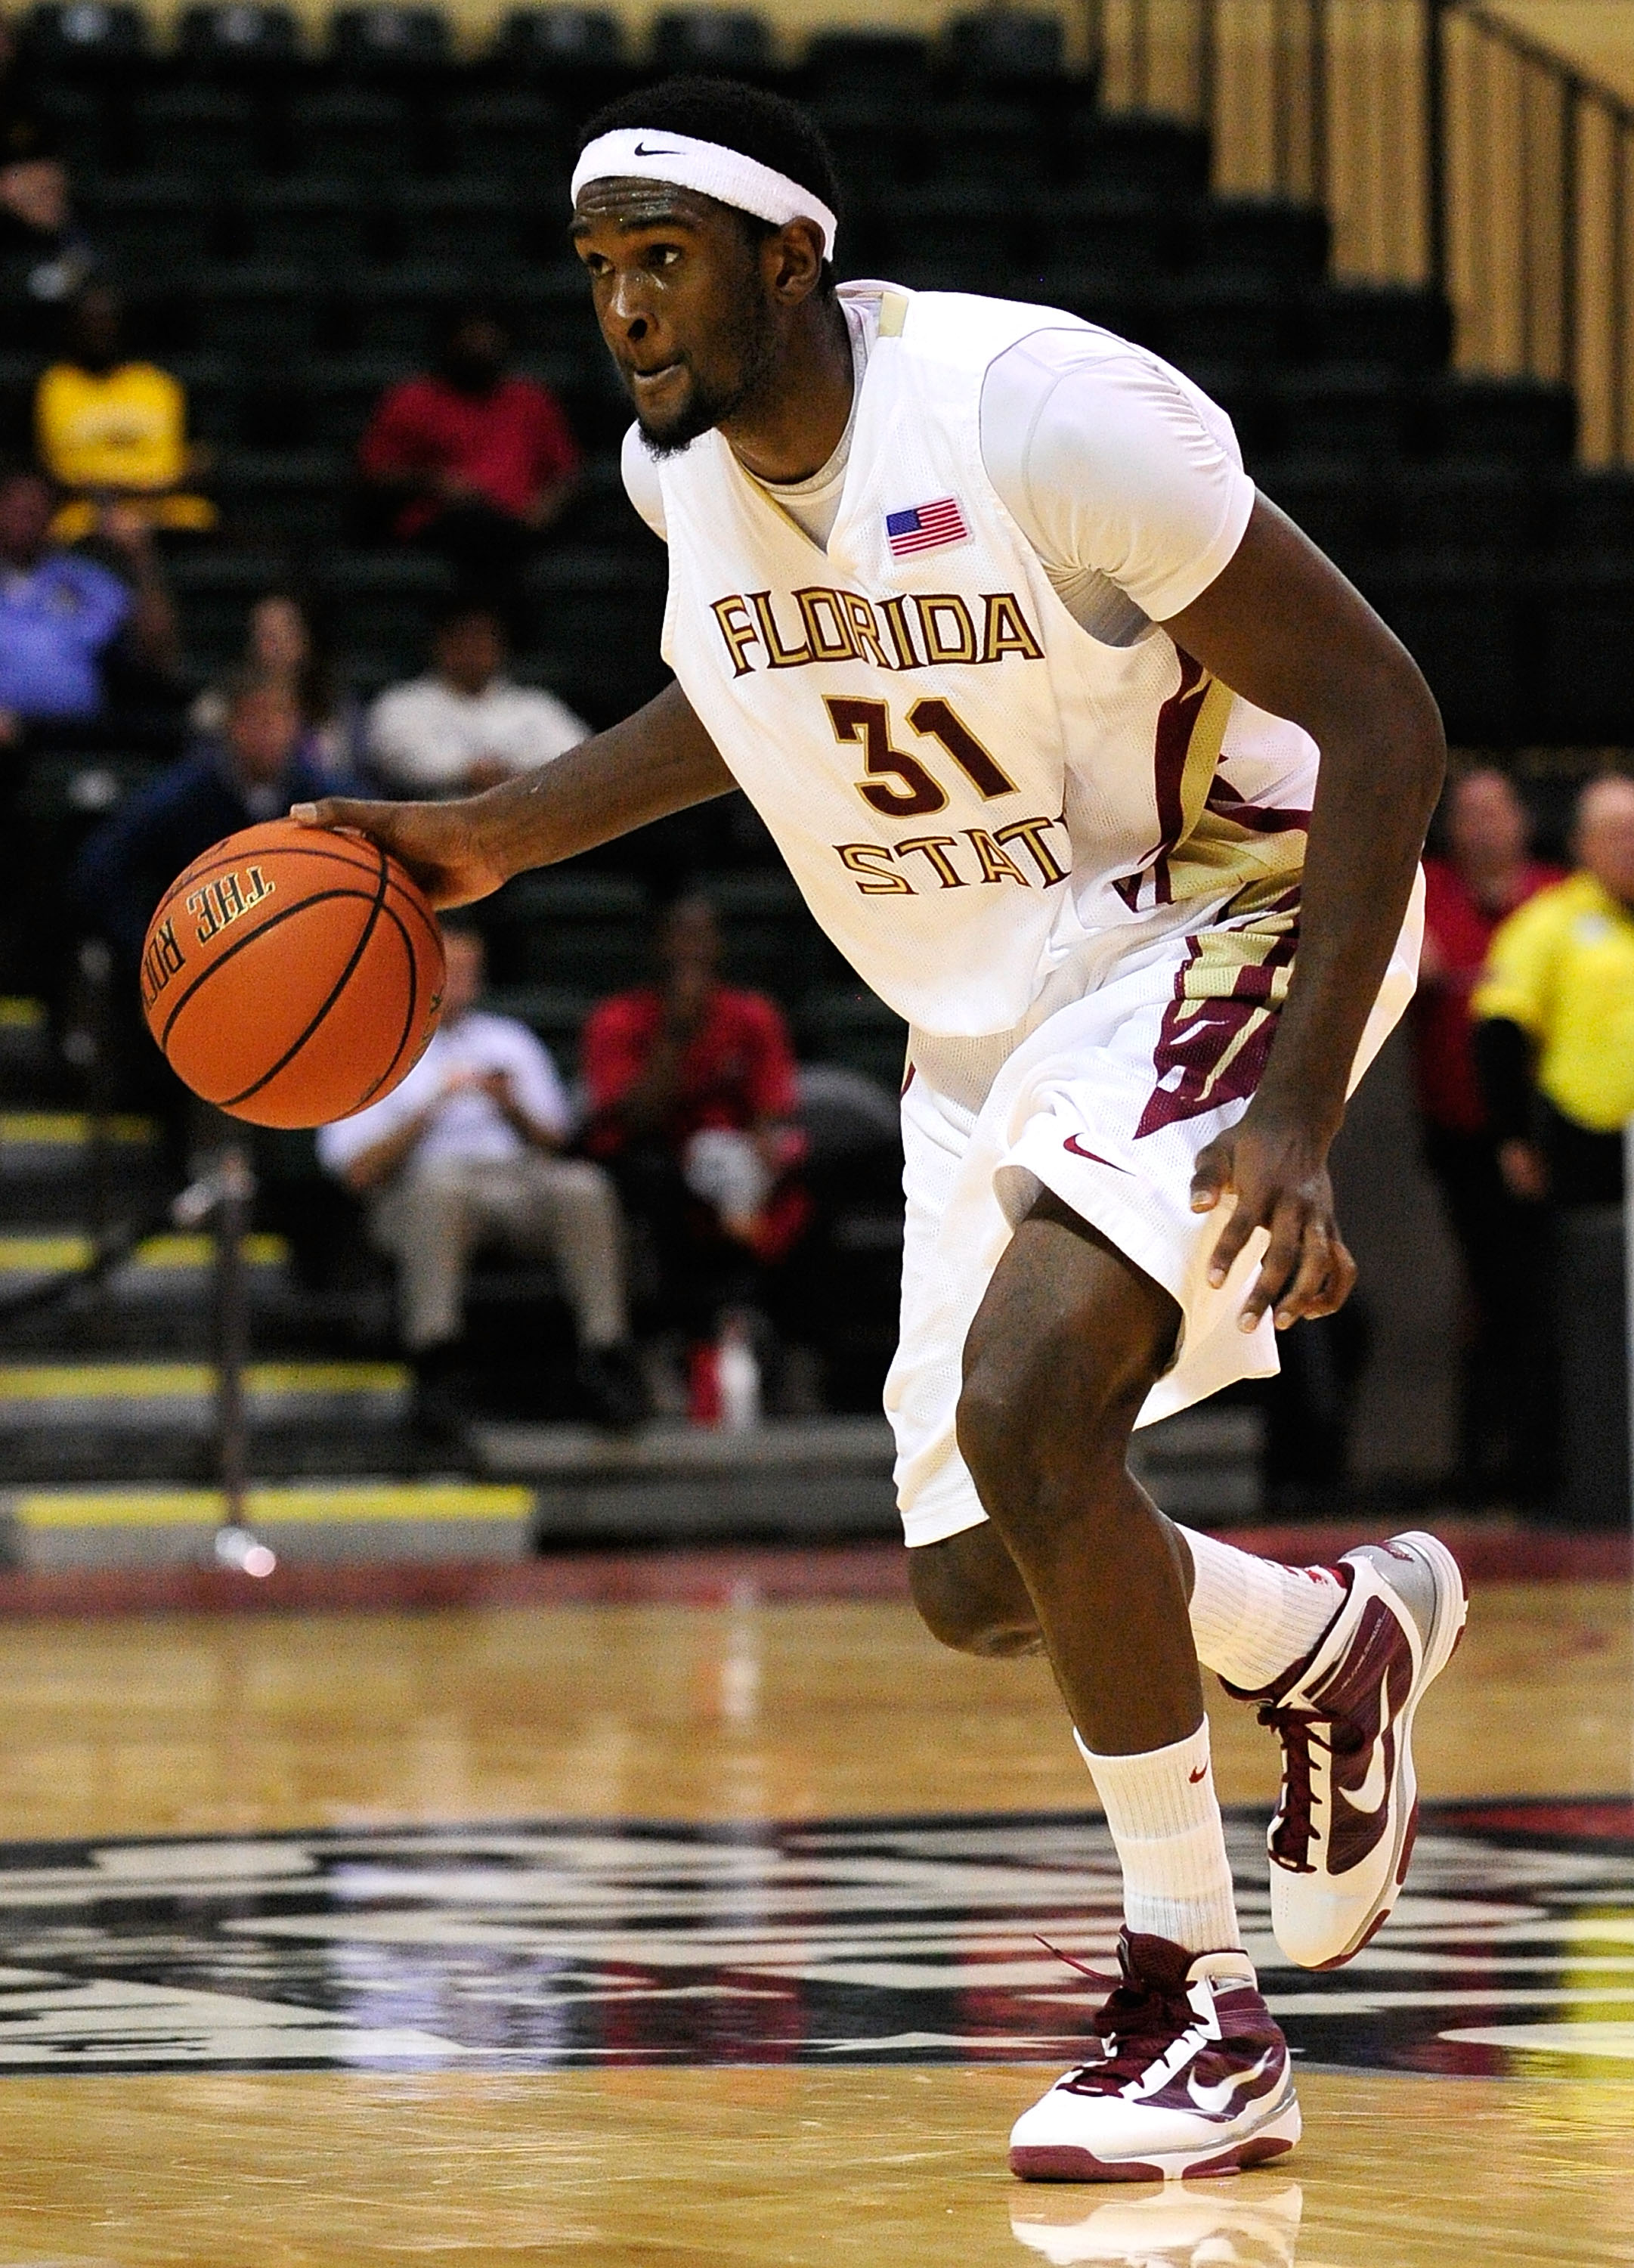 ORLANDO, FL - NOVEMBER 27:  Chris Singleton #31 of the Florida State Seminoles looks to pass against the Alabama Crimson Tide during the Old Spice Classic at Disney's Milk House on November 27, 2009 in Orlando, Florida.  (Photo by Sam Greenwood/Getty Imag